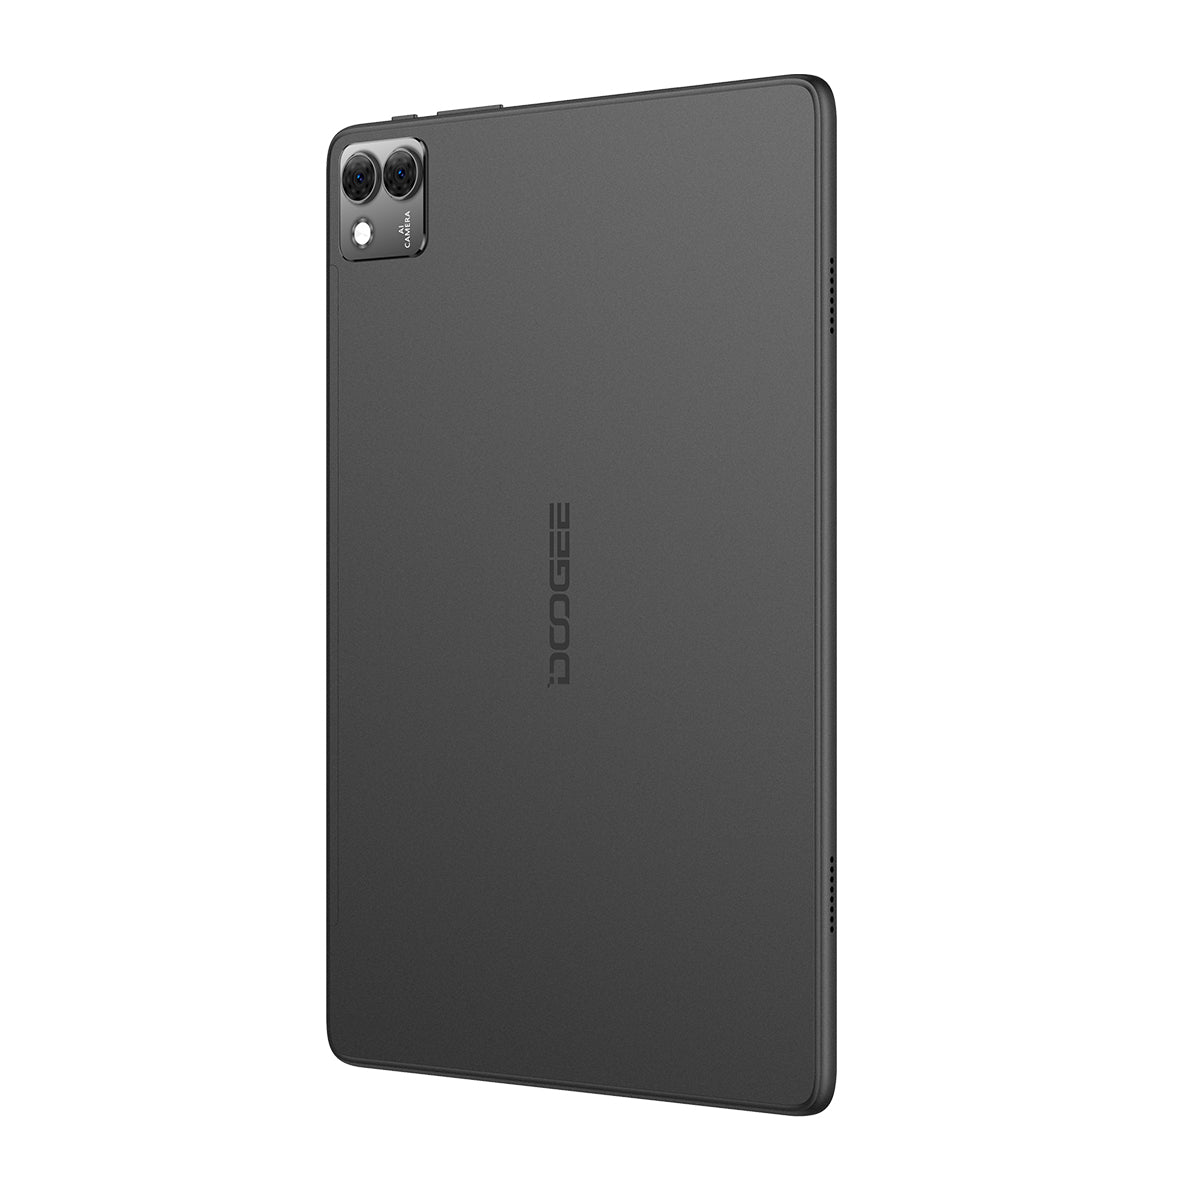 DOOGEE LAUNCH - New Tablets T10S AND T20S @doogee_official @doc.online